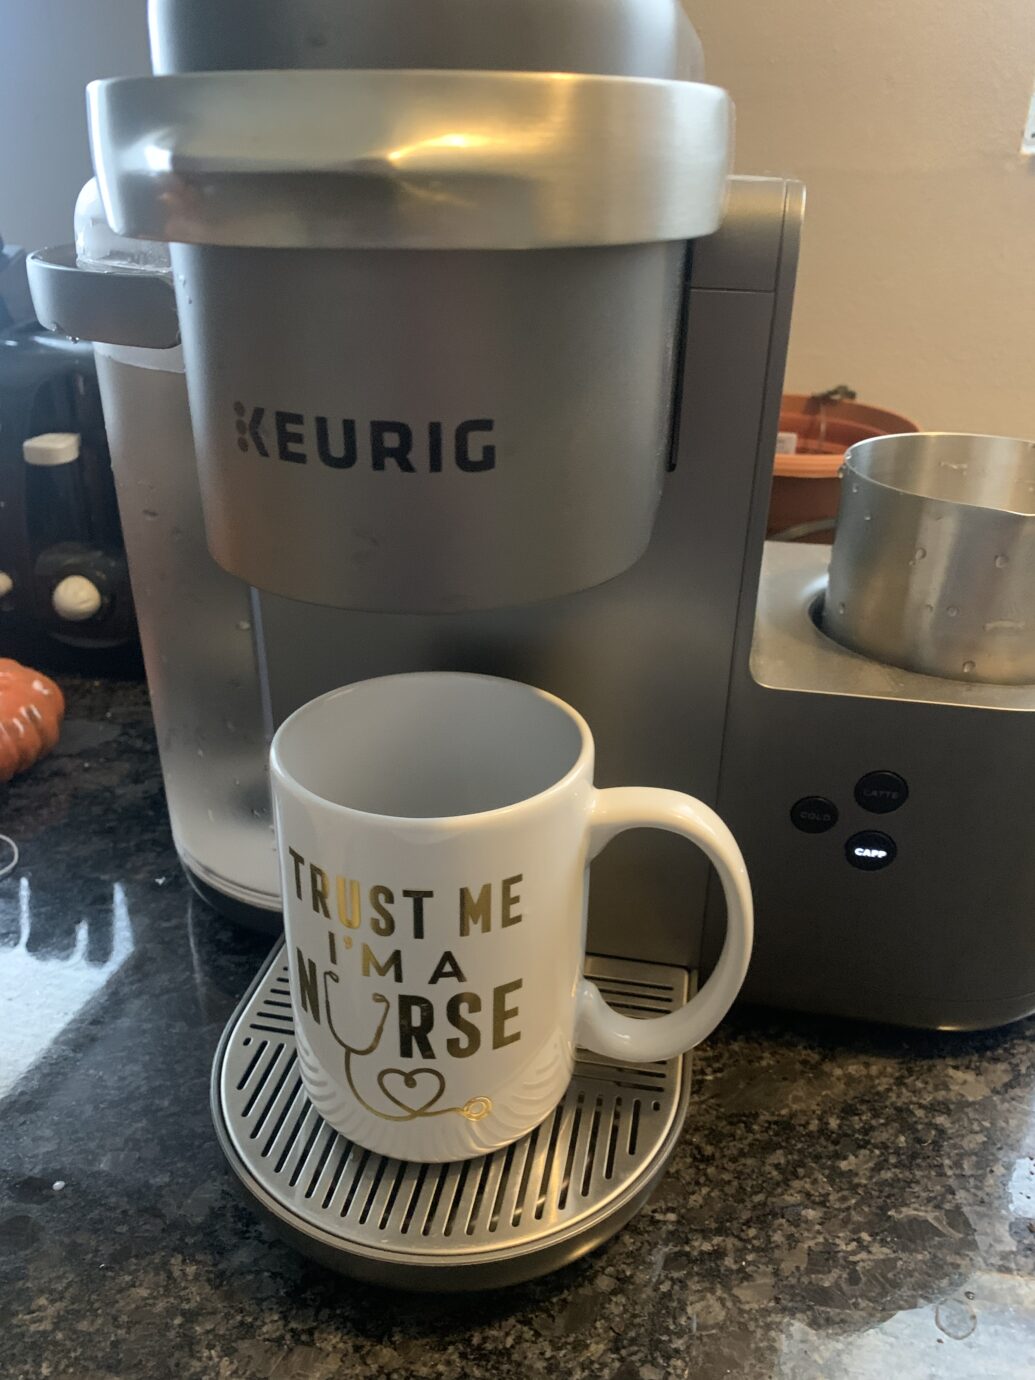 Keurig K-Cafe Single Serve K-Cup Coffee, Latte and Cappuccino Maker &  Reviews